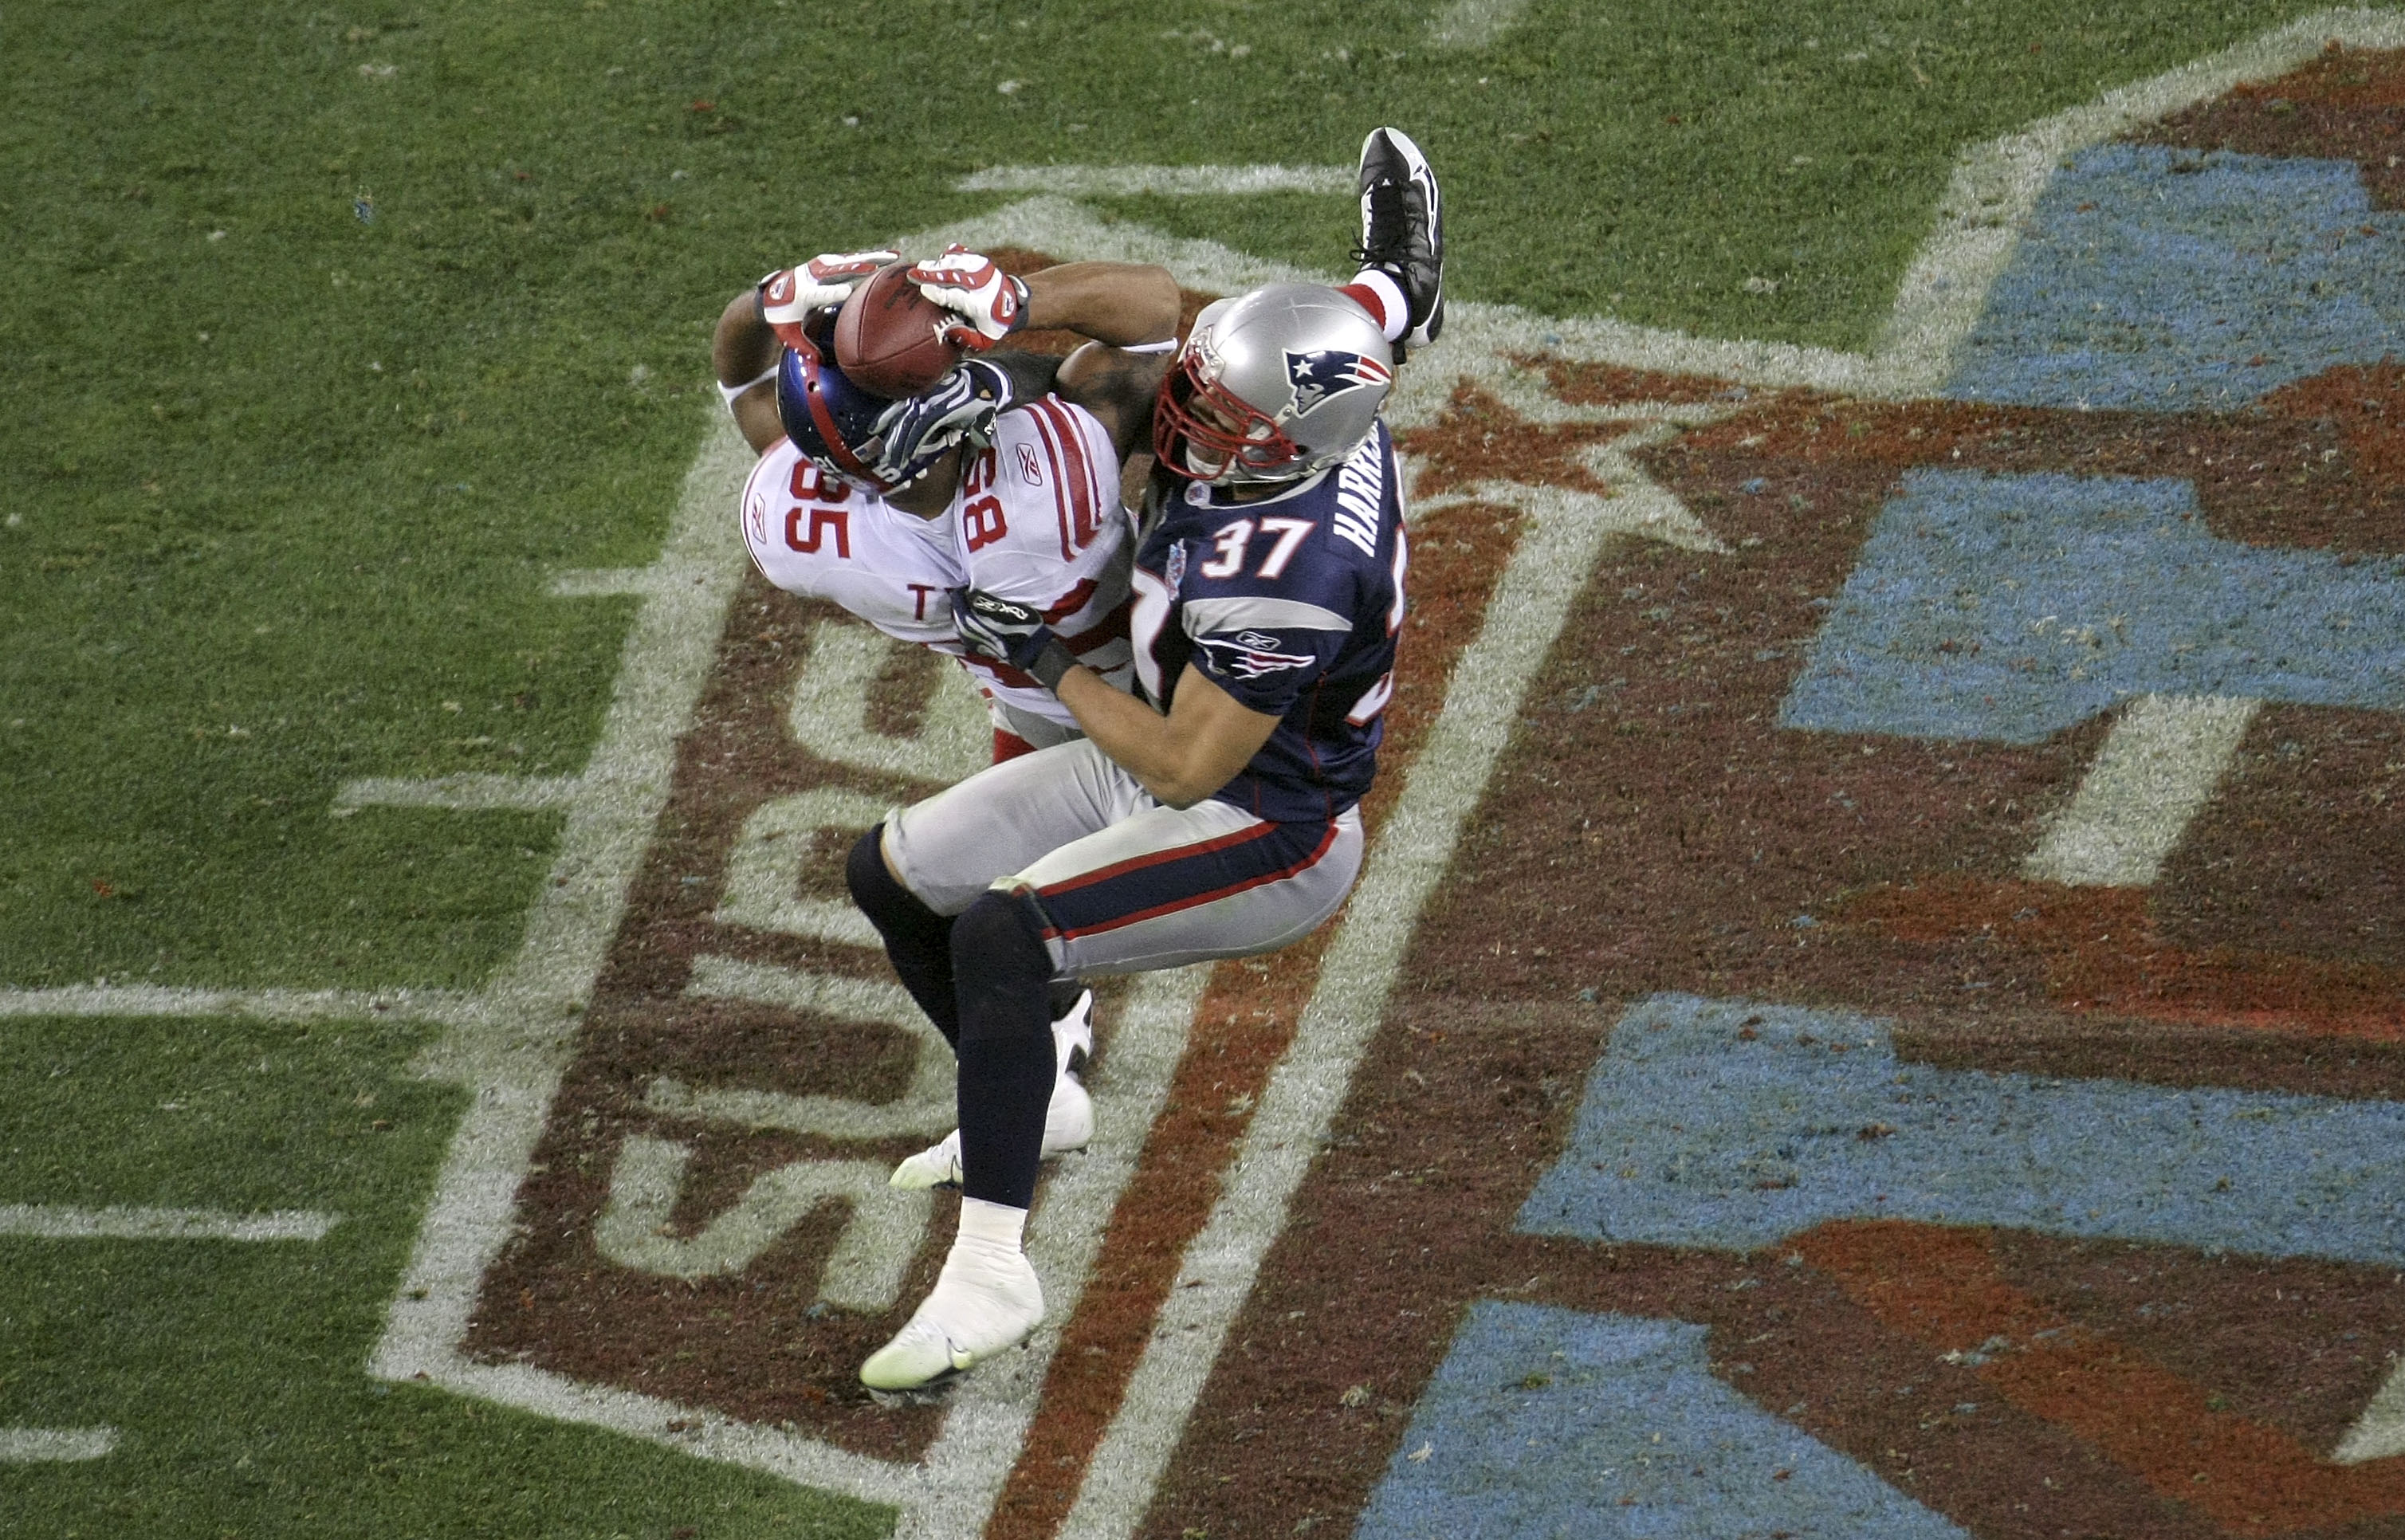 GLENDALE, AZ - FEBRUARY 03:  David Tyree #85 of the New York Giants catches a 32-yard pass from Eli Manning #10 as Rodney Harrison #37 of the New England Patriots attempts to knock it out in the fourth quarter of Super Bowl XLII on February 3, 2008 at the